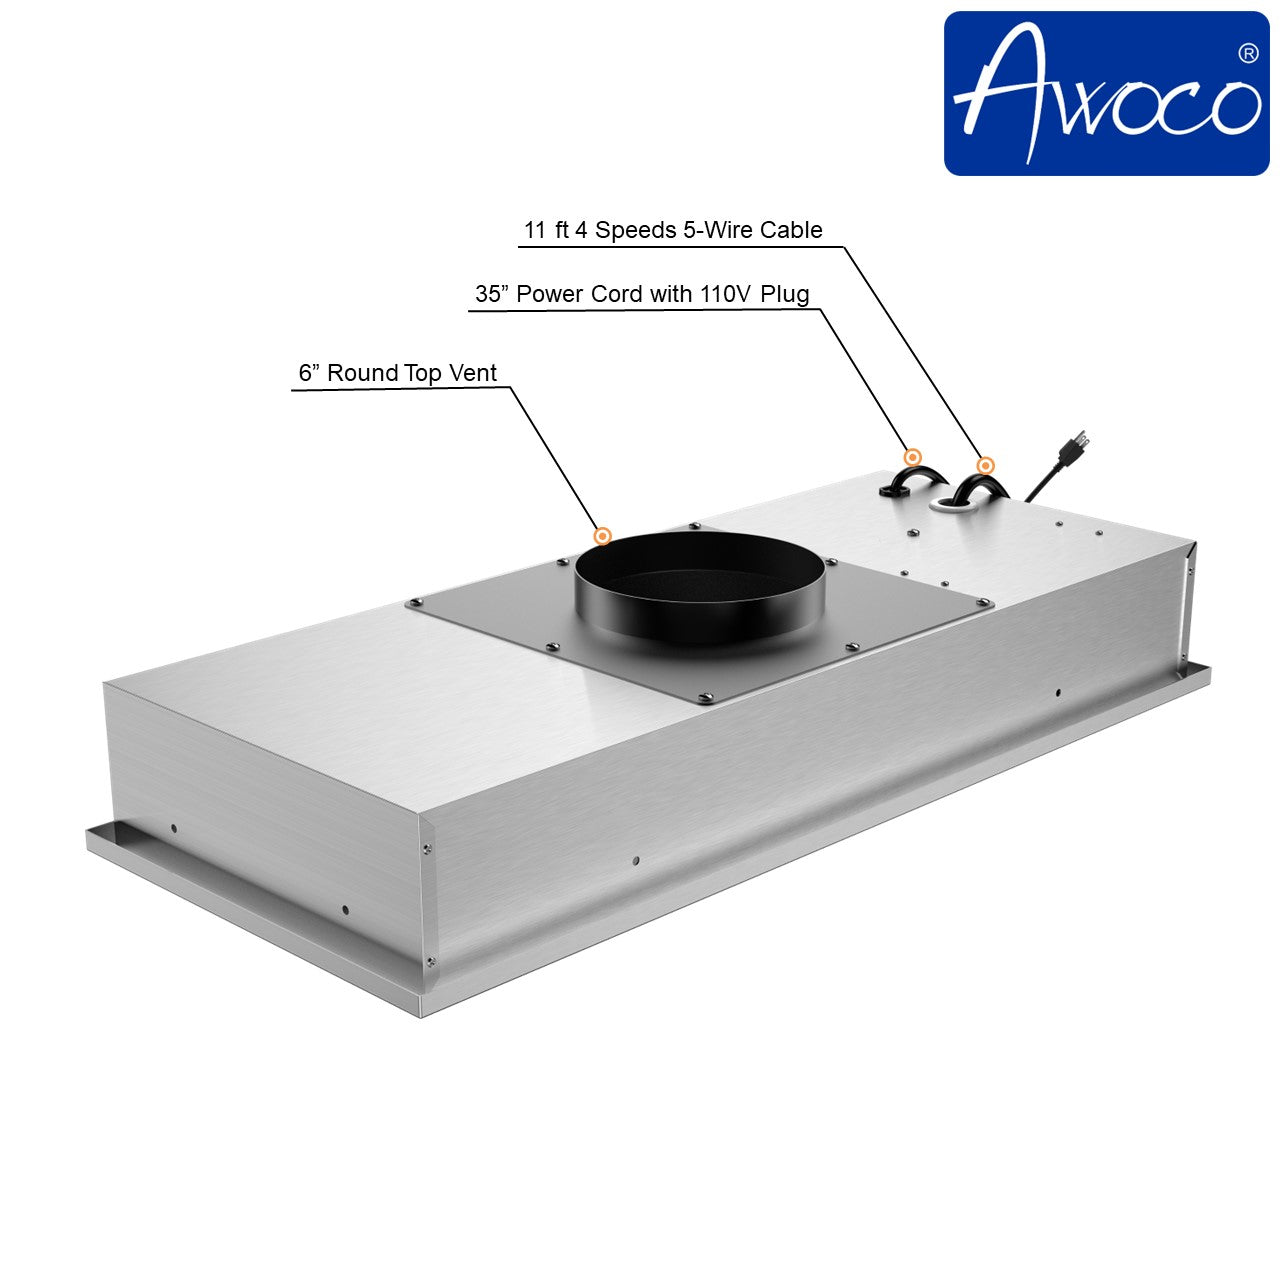 Awoco RH-IT06-R30 14-1/2”D Super Quiet Split Insert Ceiling Mount Stainless Steel Range Hood, 4-Speed, 800 CFM, LED Lights with 6” Blower & Remote Control (30"W 6" Vent)